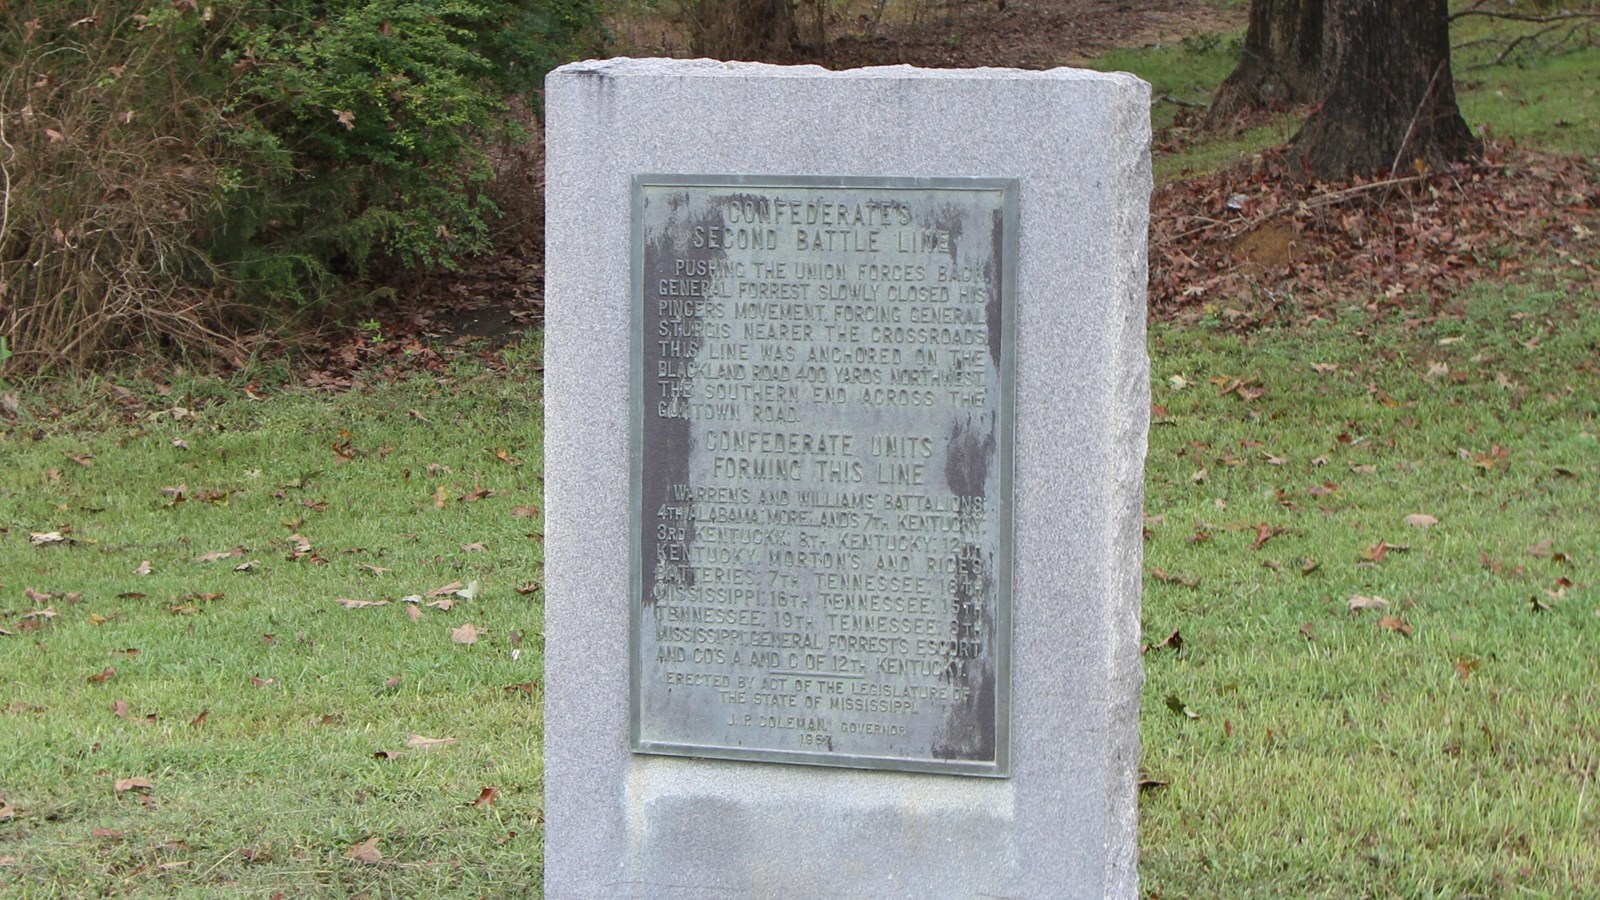 4 foot granite marker with brass information panel on the front. Grass surrounds marker.